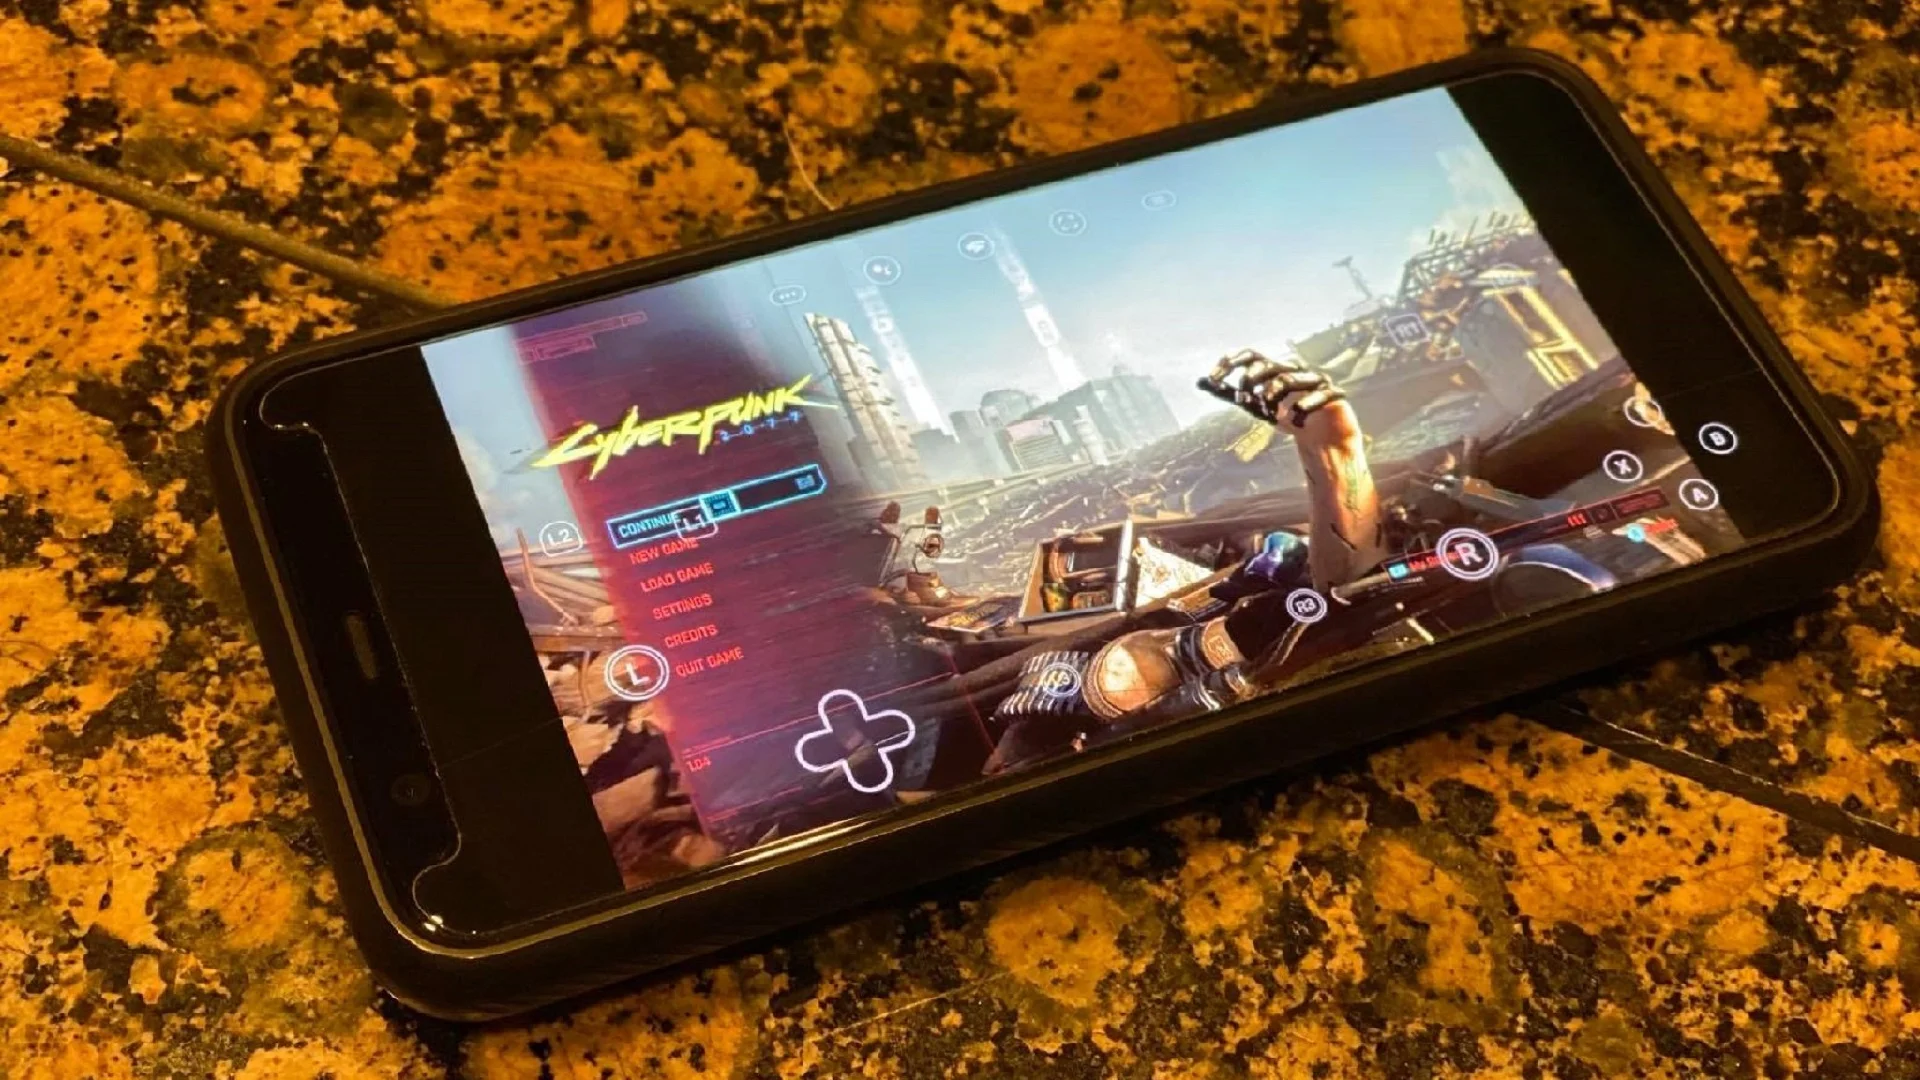 New games in the universe of The Witcher and Cyberpunk 2077 may be released on mobile devices